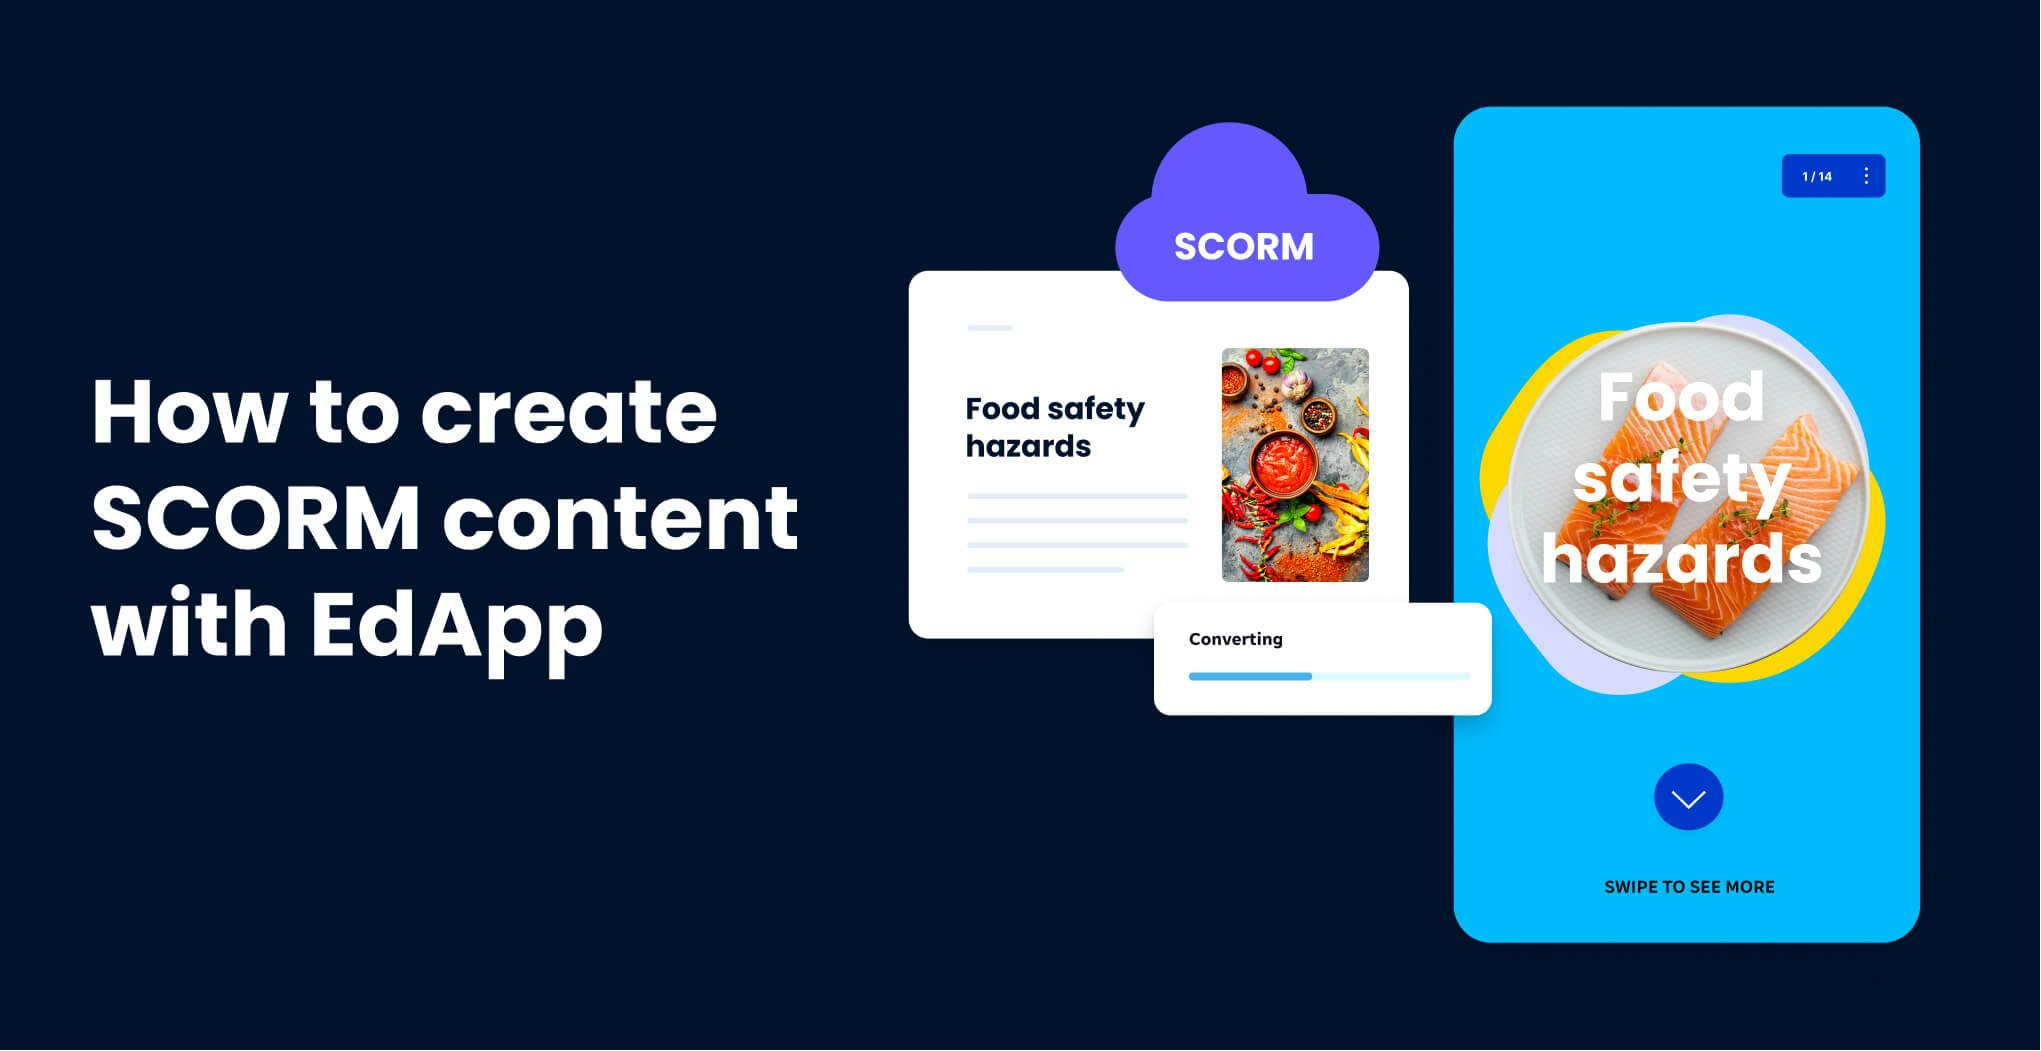 How to create SCORM content with SC Training (formerly EdApp)